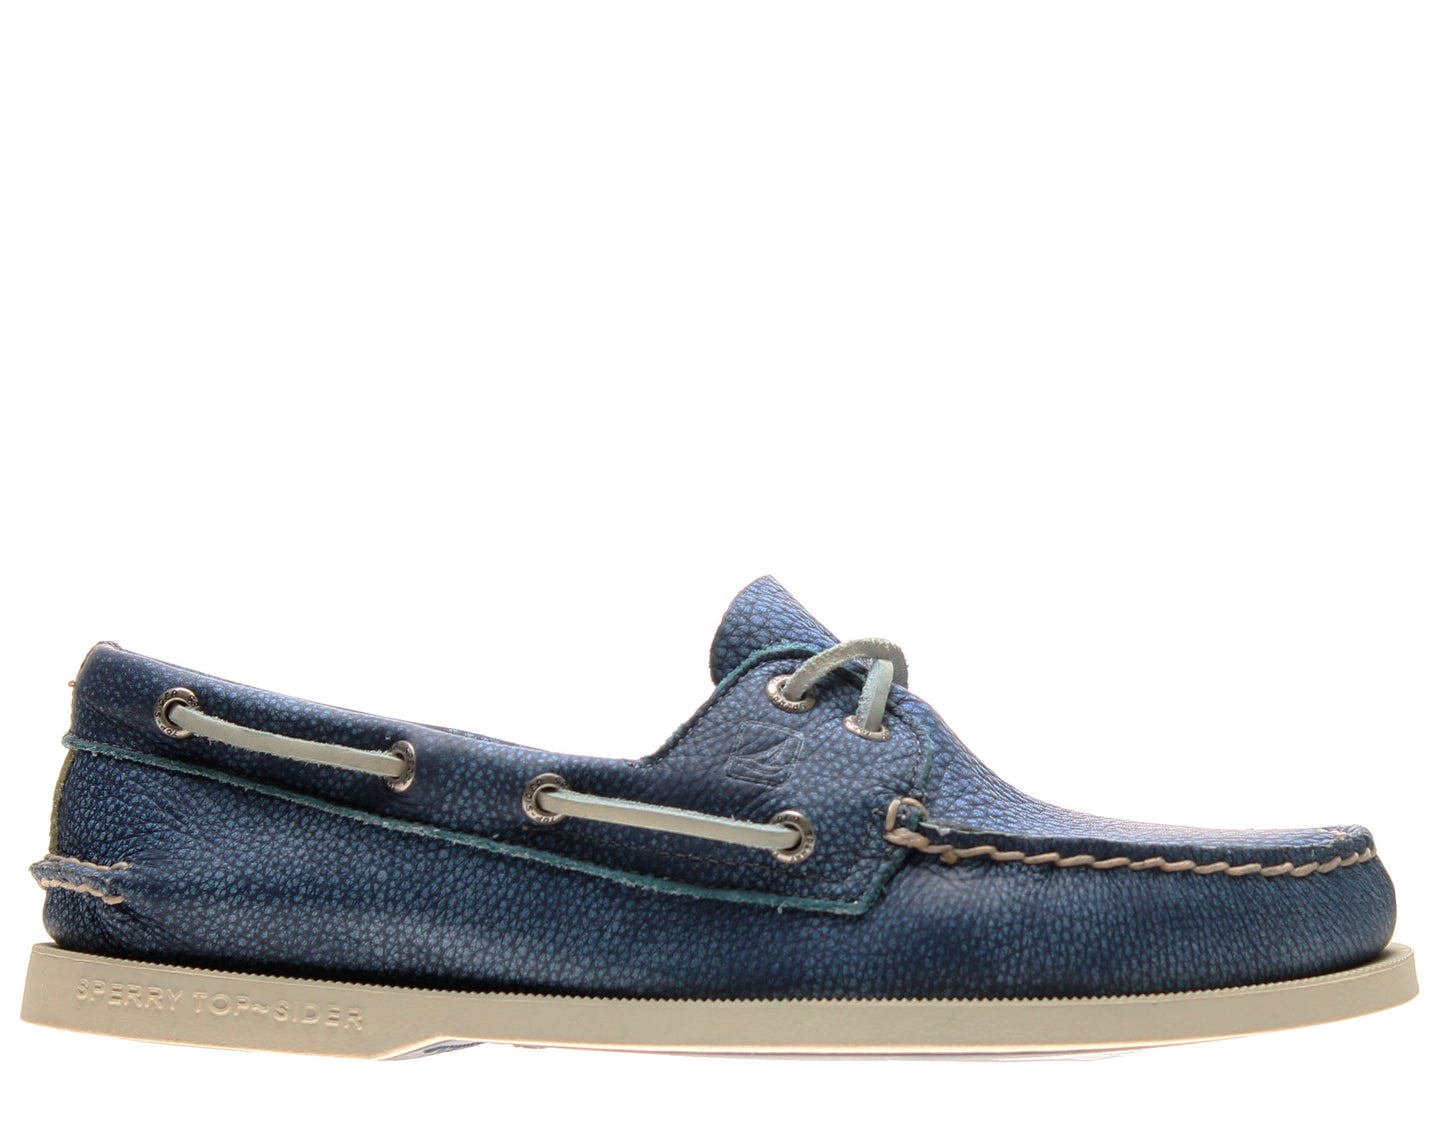 Sperry Top Sider Authentic Original Washed 2-Eye Men's Boat Shoes